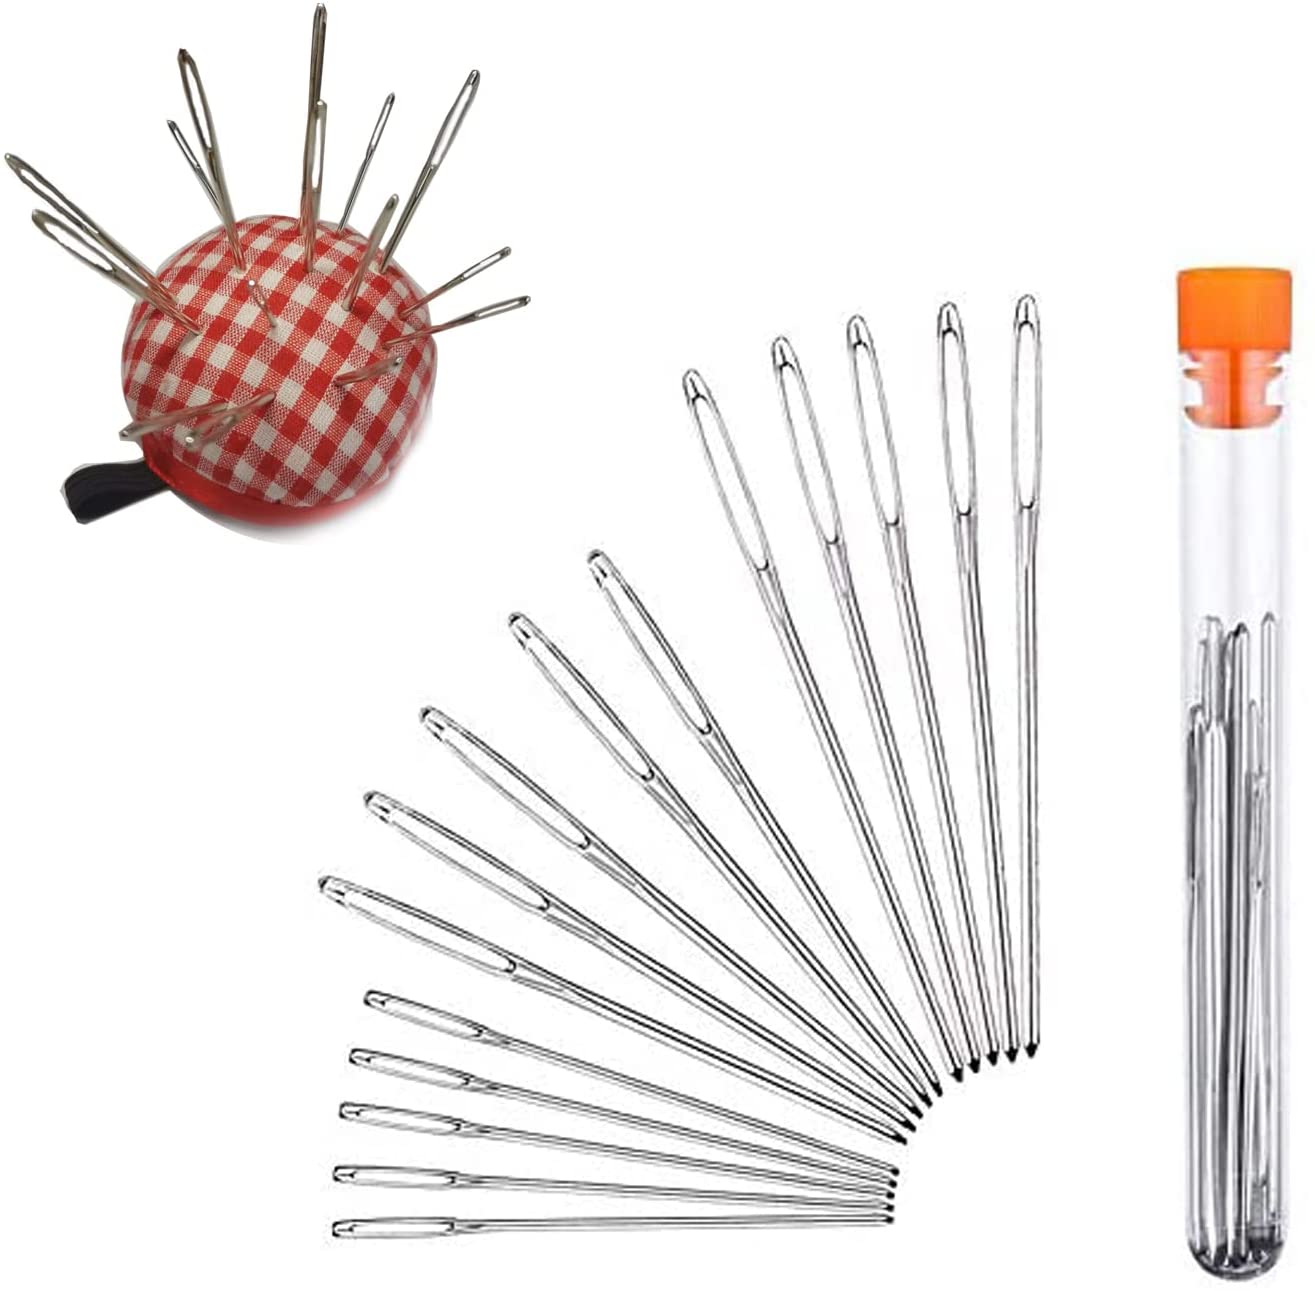 Large Eye Blunt Needles with Pin Cushion, 15 Pcs Stainless Steel Yarn  Knitting Needles , Suitable for Crochet Projects, Silver Sewing Needles,  Knitting Darning Needles with Clear Bottle 